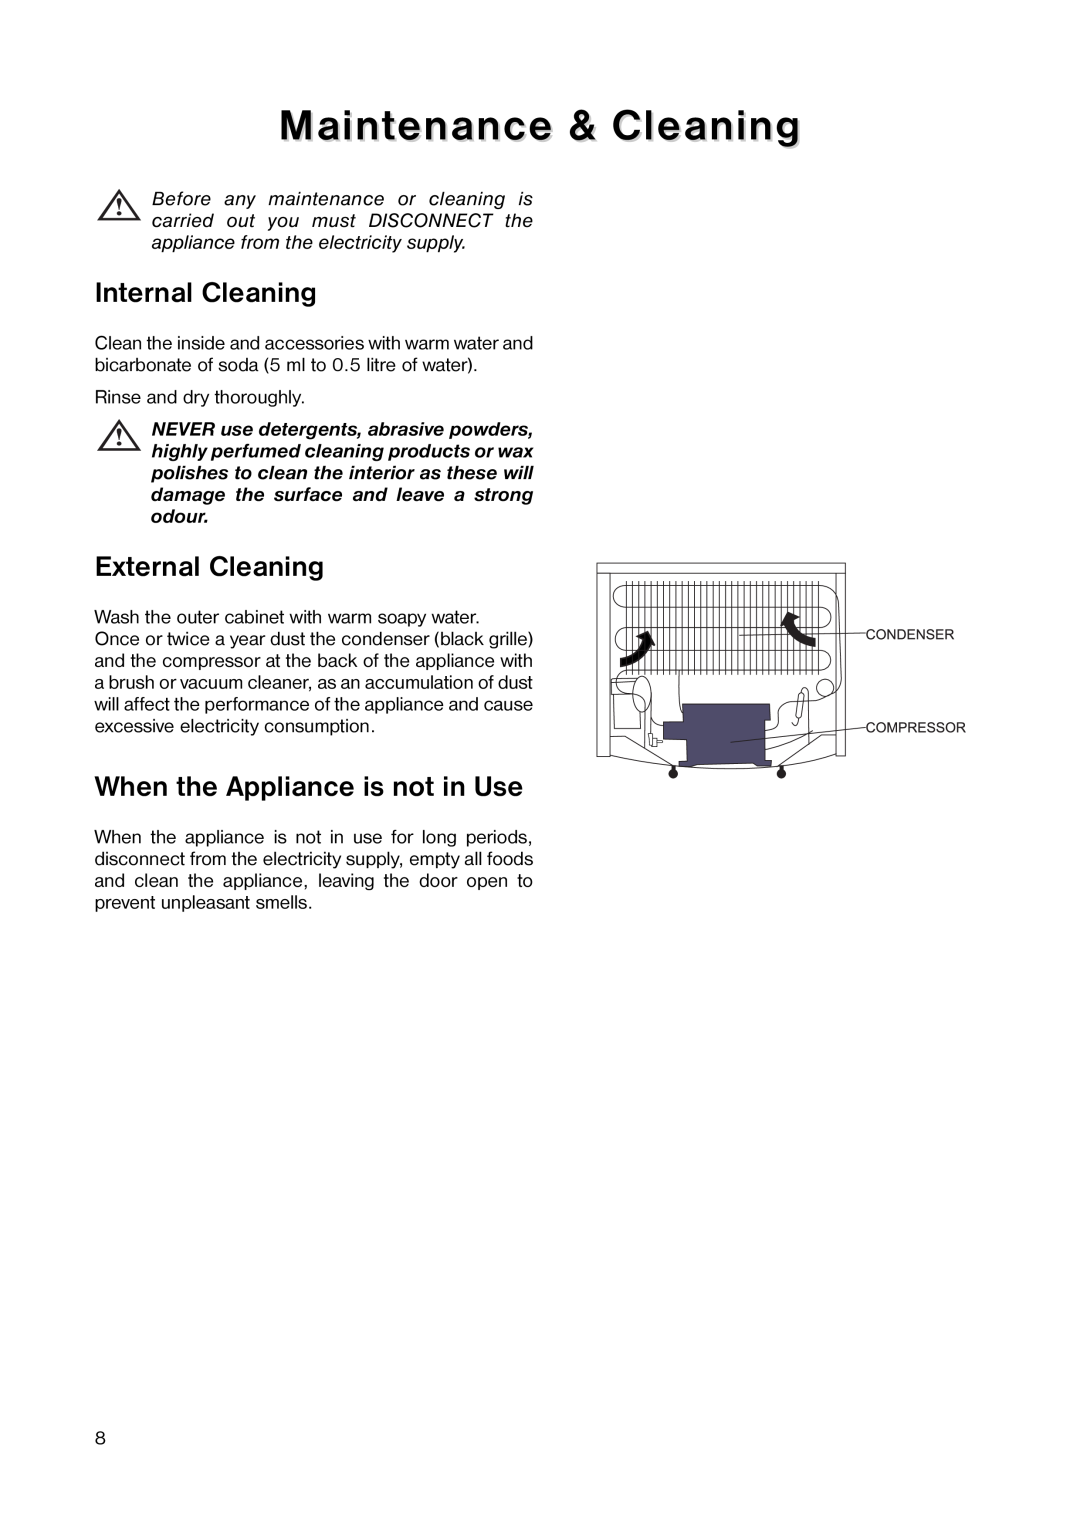 Zanussi ZV 17 manual Maintenance & Cleaning, Internal Cleaning, External Cleaning, When the Appliance is not in Use 